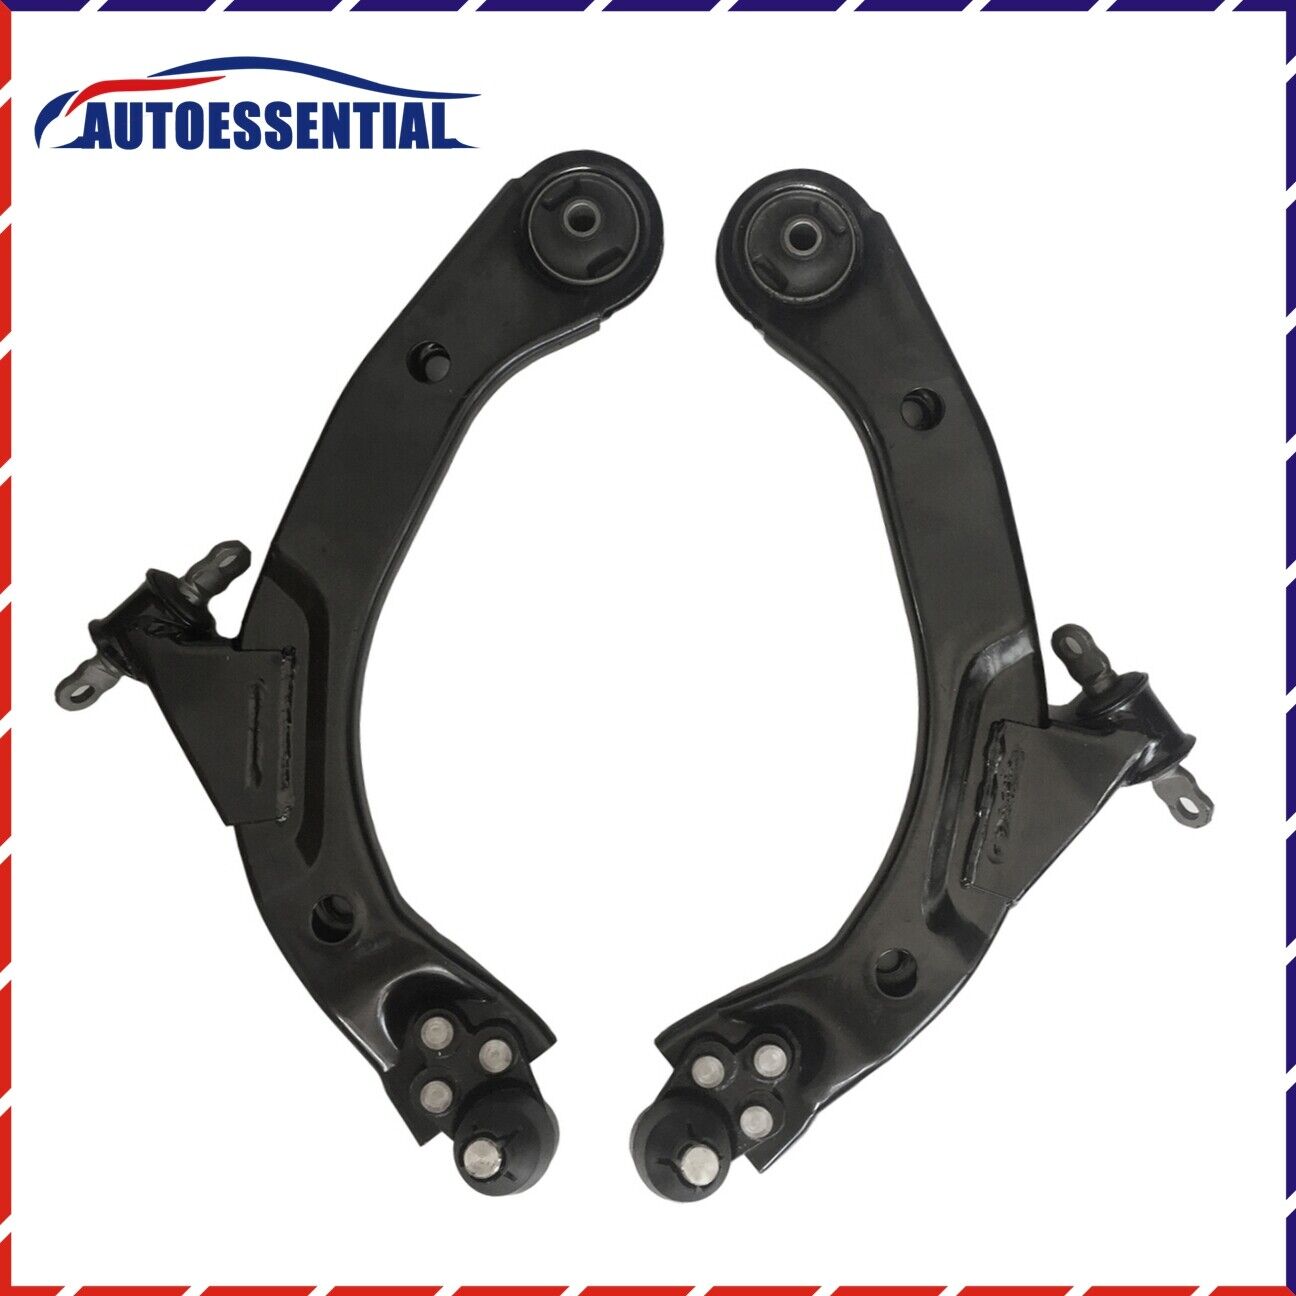 Front Lower Control Arms W/ Ball Joints Set For Chevy Cobalt Pontiac G5 Saturn